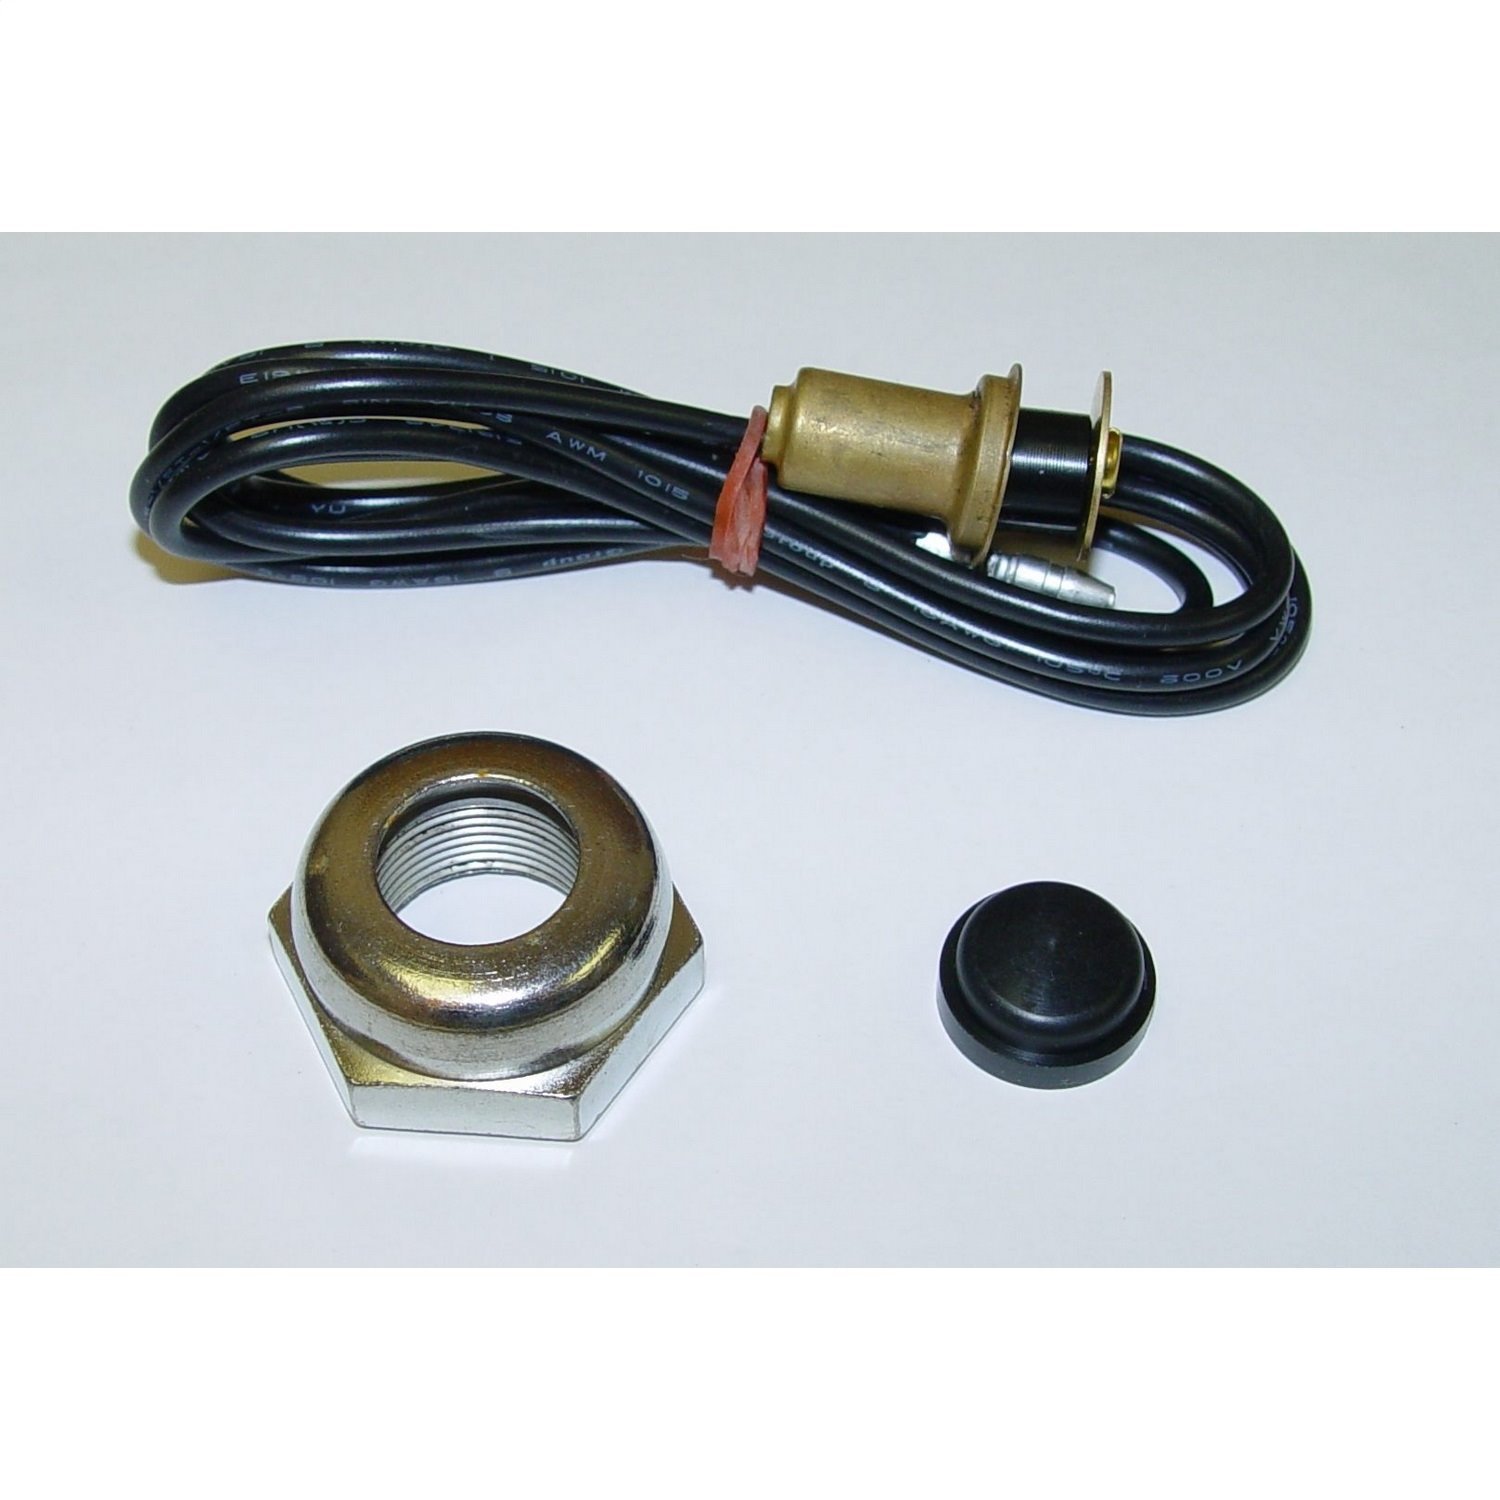 Replacement horn button kit from Omix-ADA includes nut and wiring, Fits 41-45 Willys MBs and Ford GPWs.